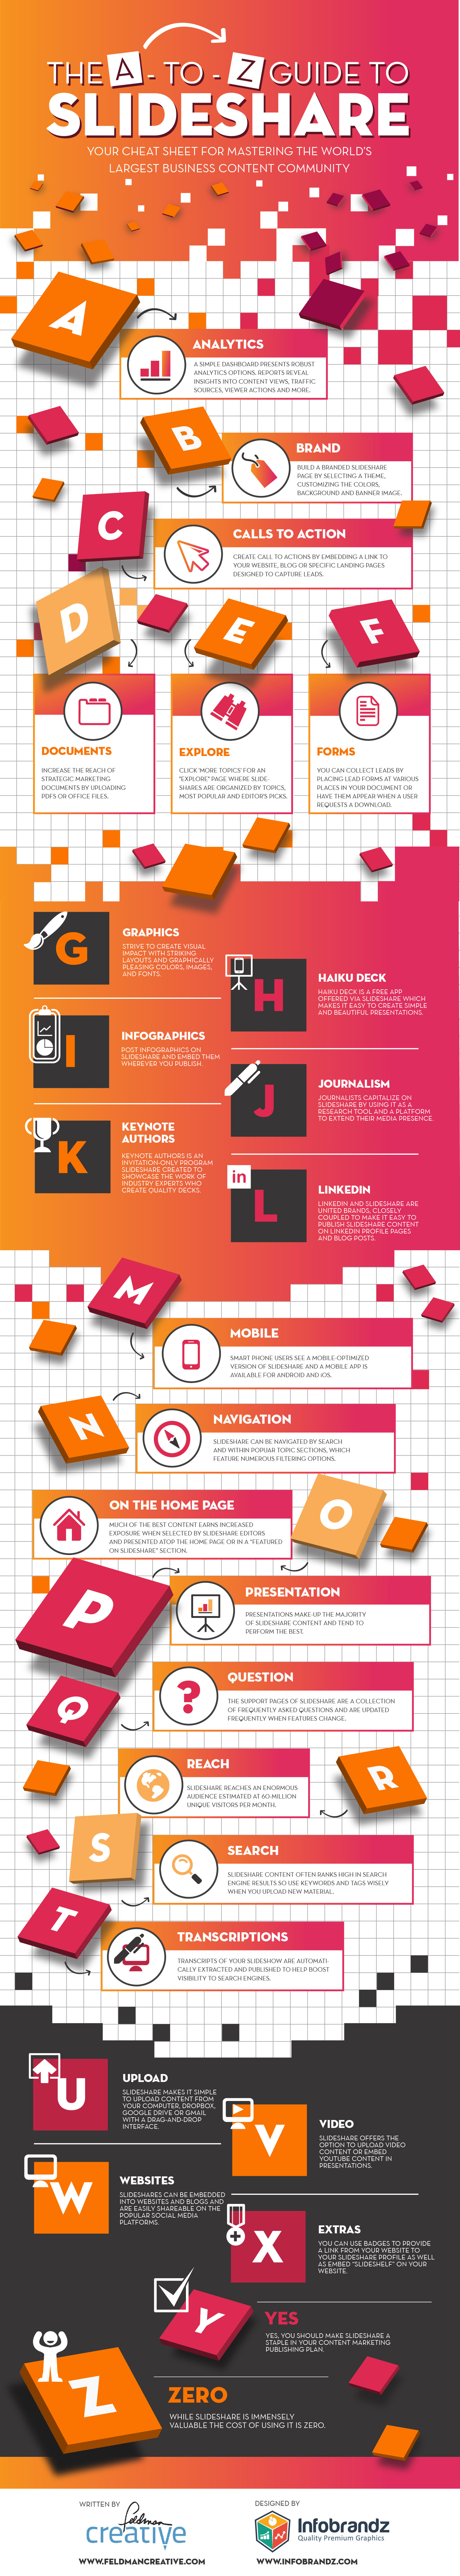 A to Z Guide to SlideShare